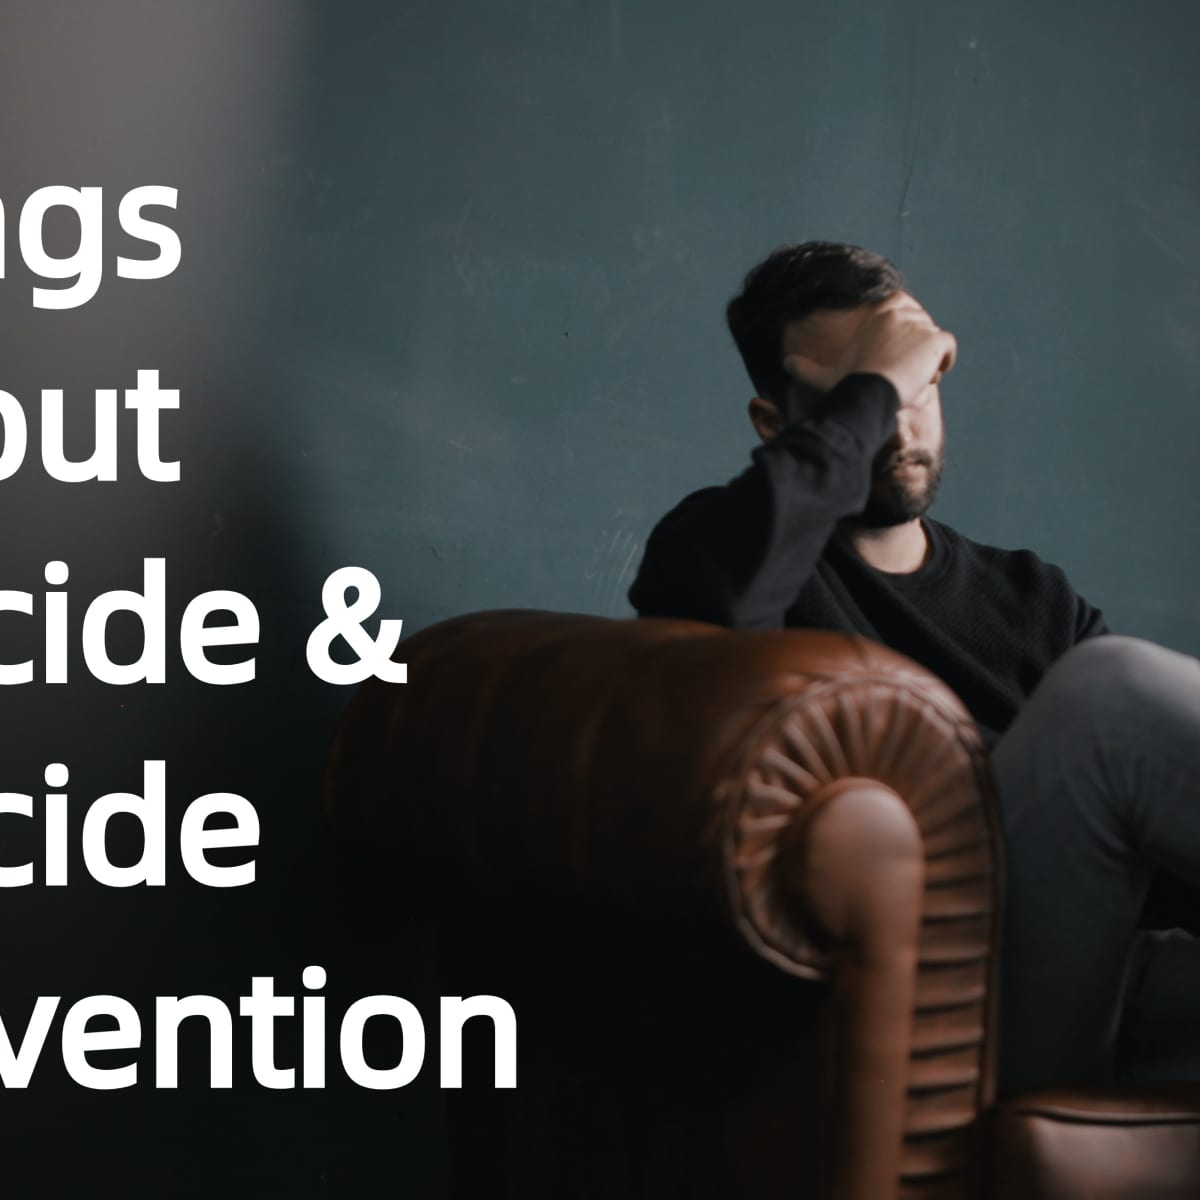 104 Songs About Suicide And Suicide Prevention Spinditty